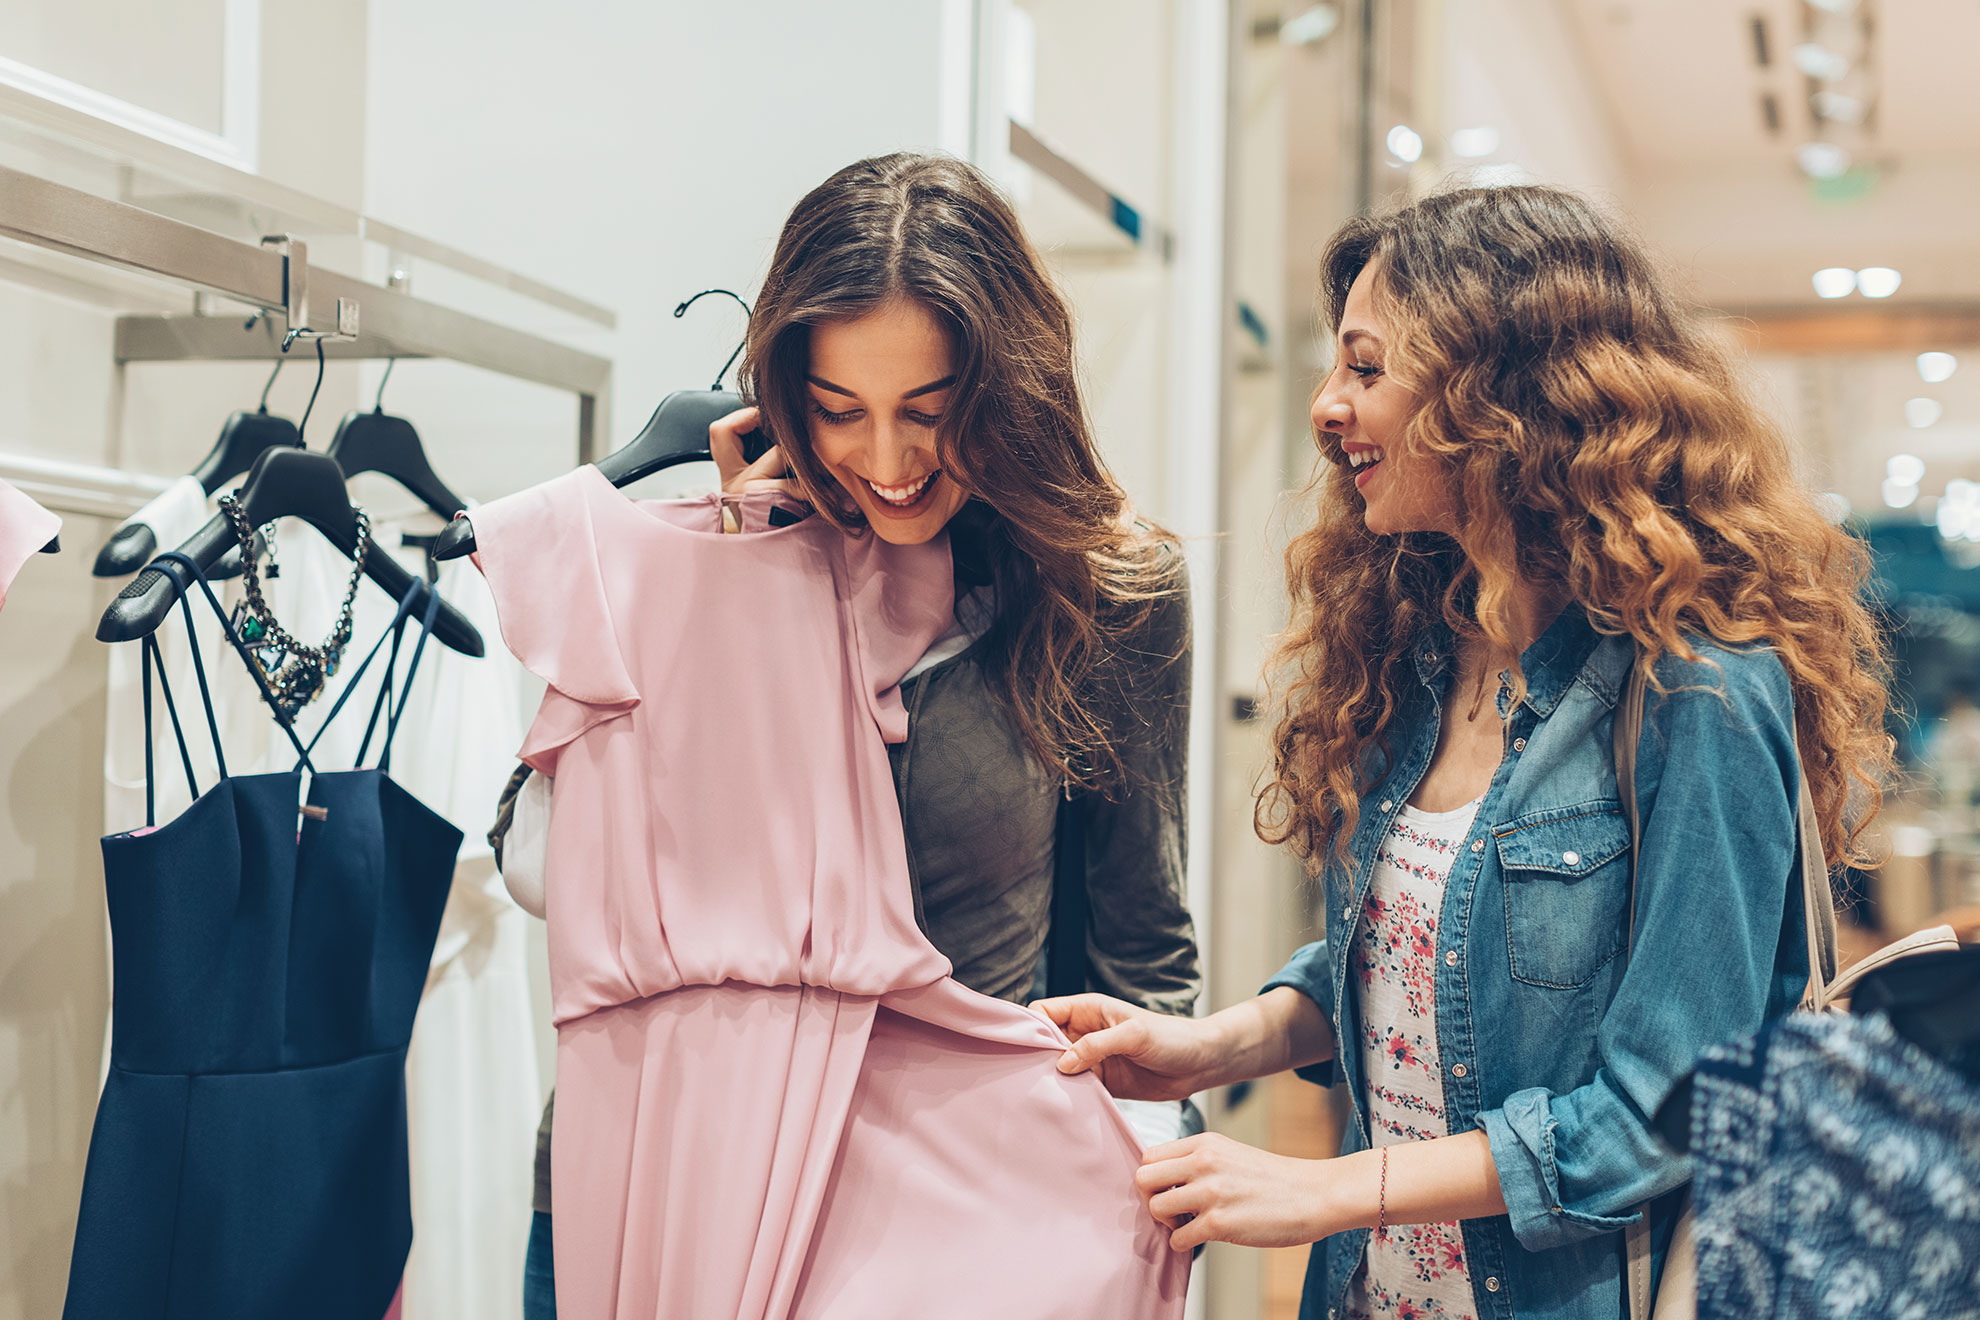 5 Steps to Build Customer Loyalty in Retail – InMoment